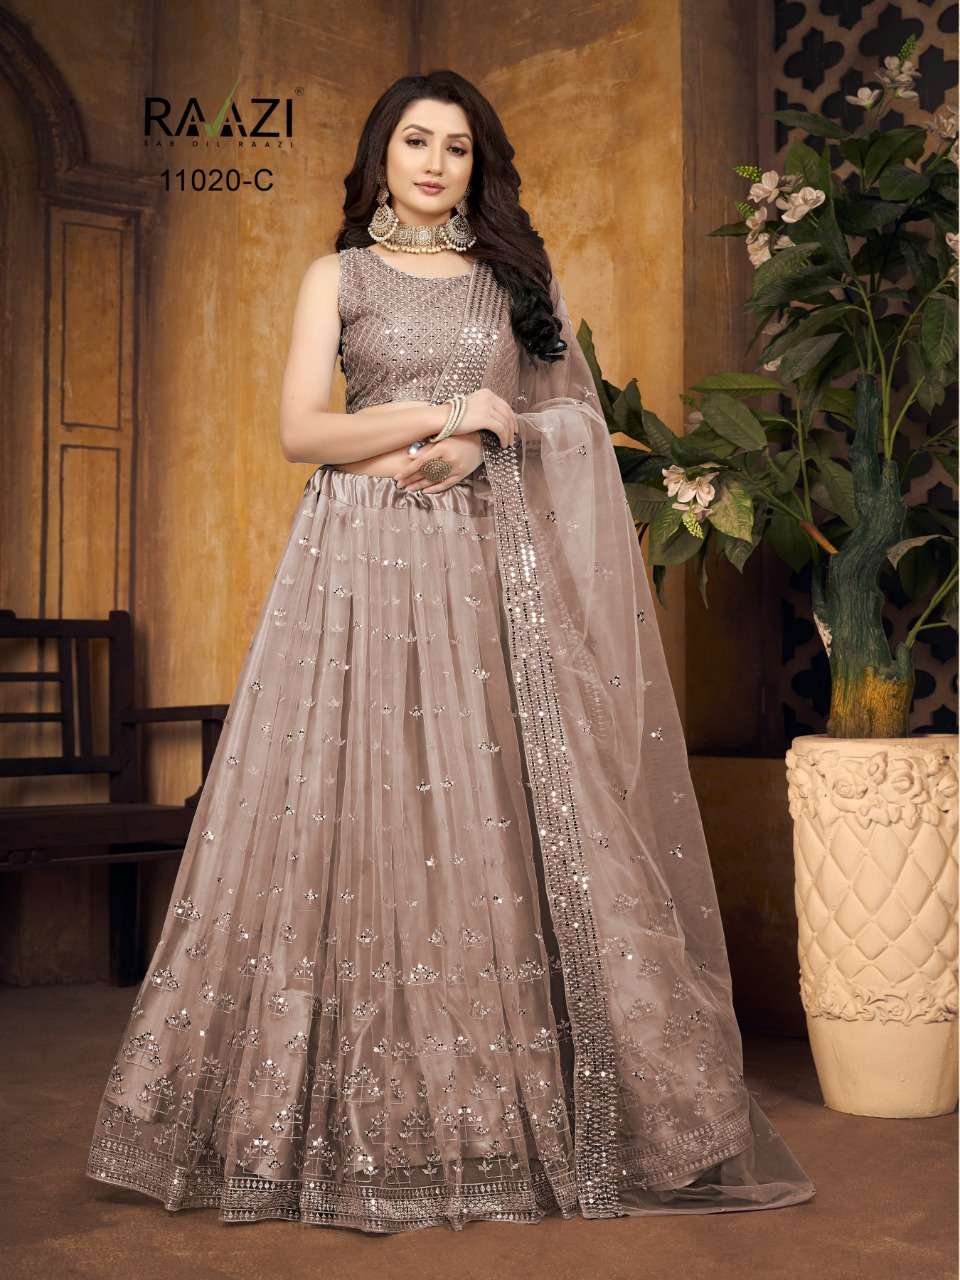 Mirror Magic 11020 Colours By Rama Fashion 11020-A To 11020-D Series Designer Beautiful Wedding Bridal Collection Occasional Wear & Party Wear Net Lehengas At Wholesale Price